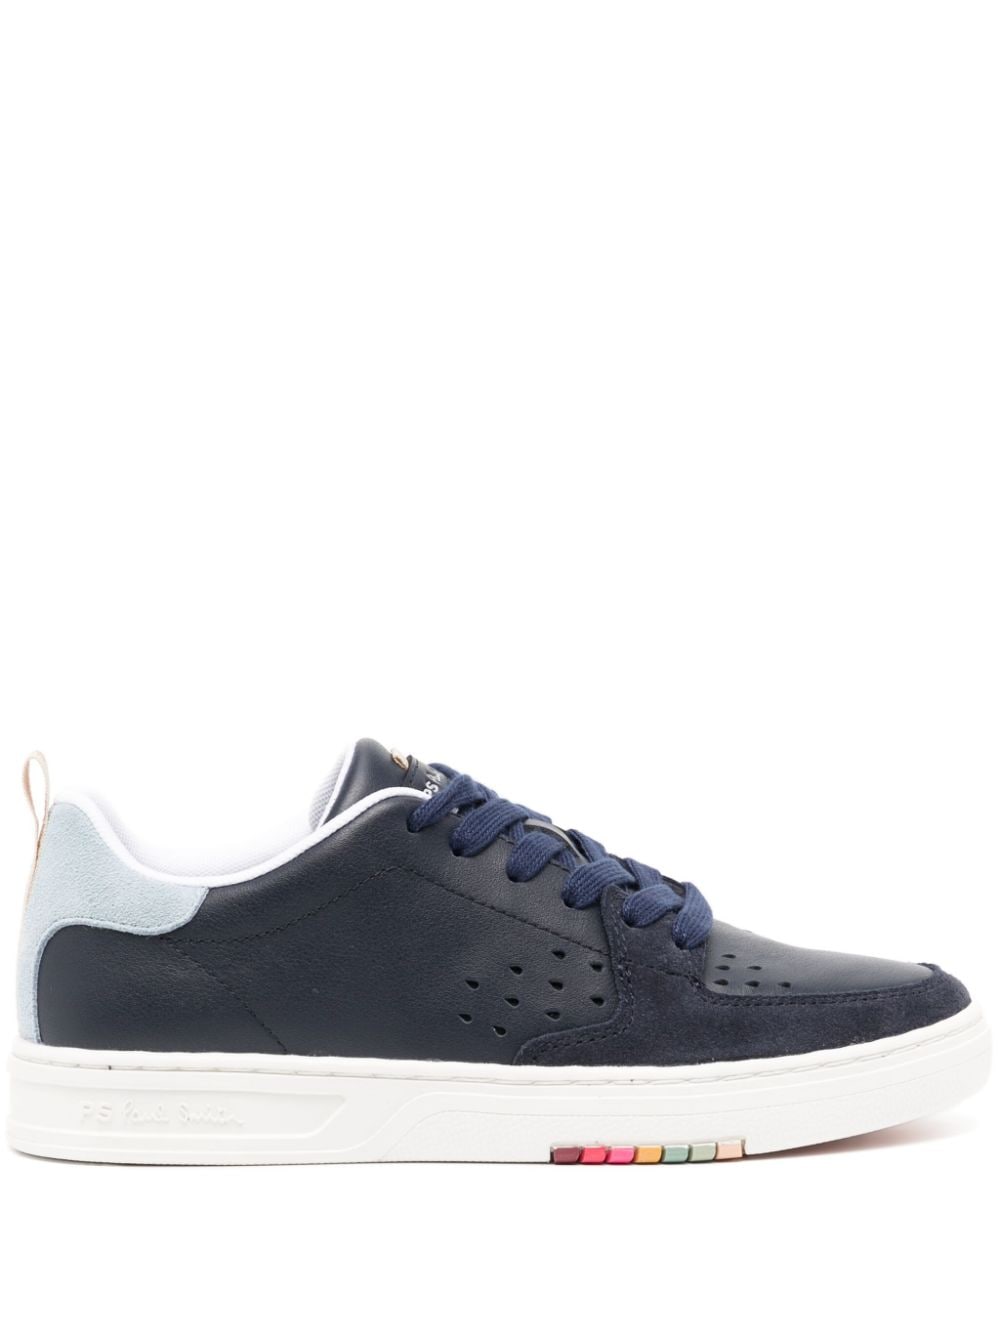 Paul Smith Cosmo leather sneakers - Blue von Paul Smith